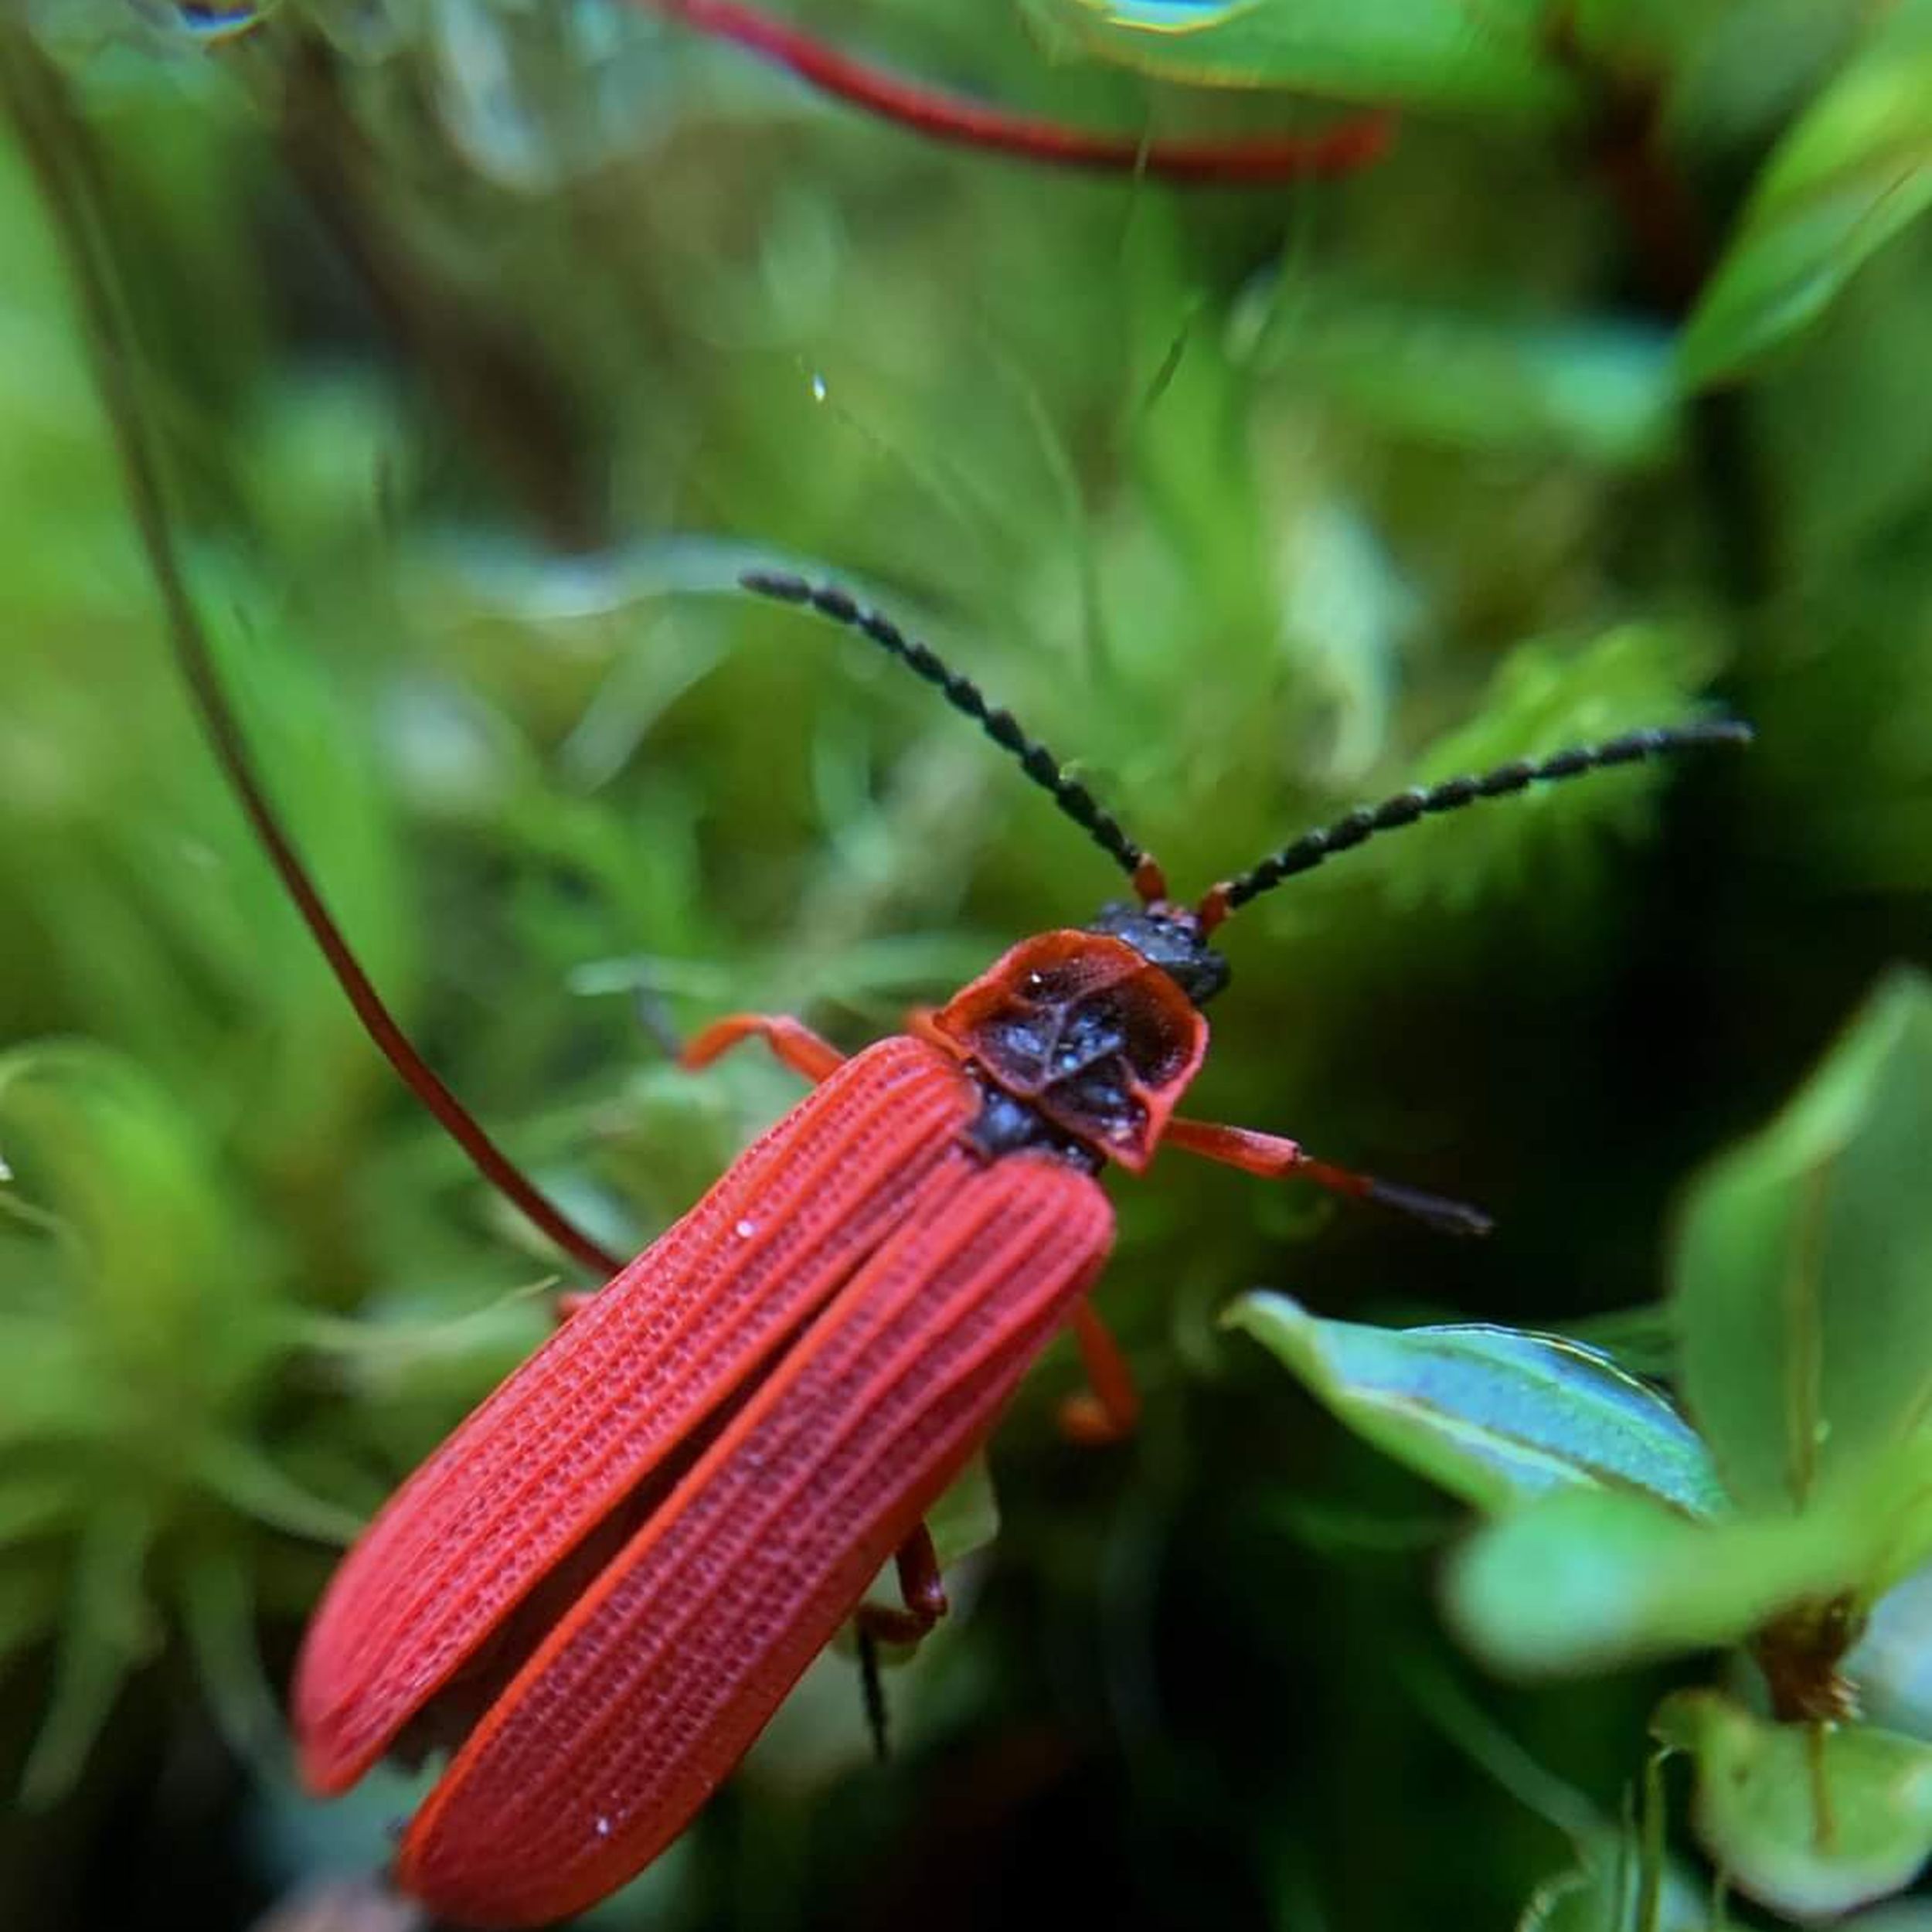 Bugging the Northwest: The bright side of this beetle is its stinky warning